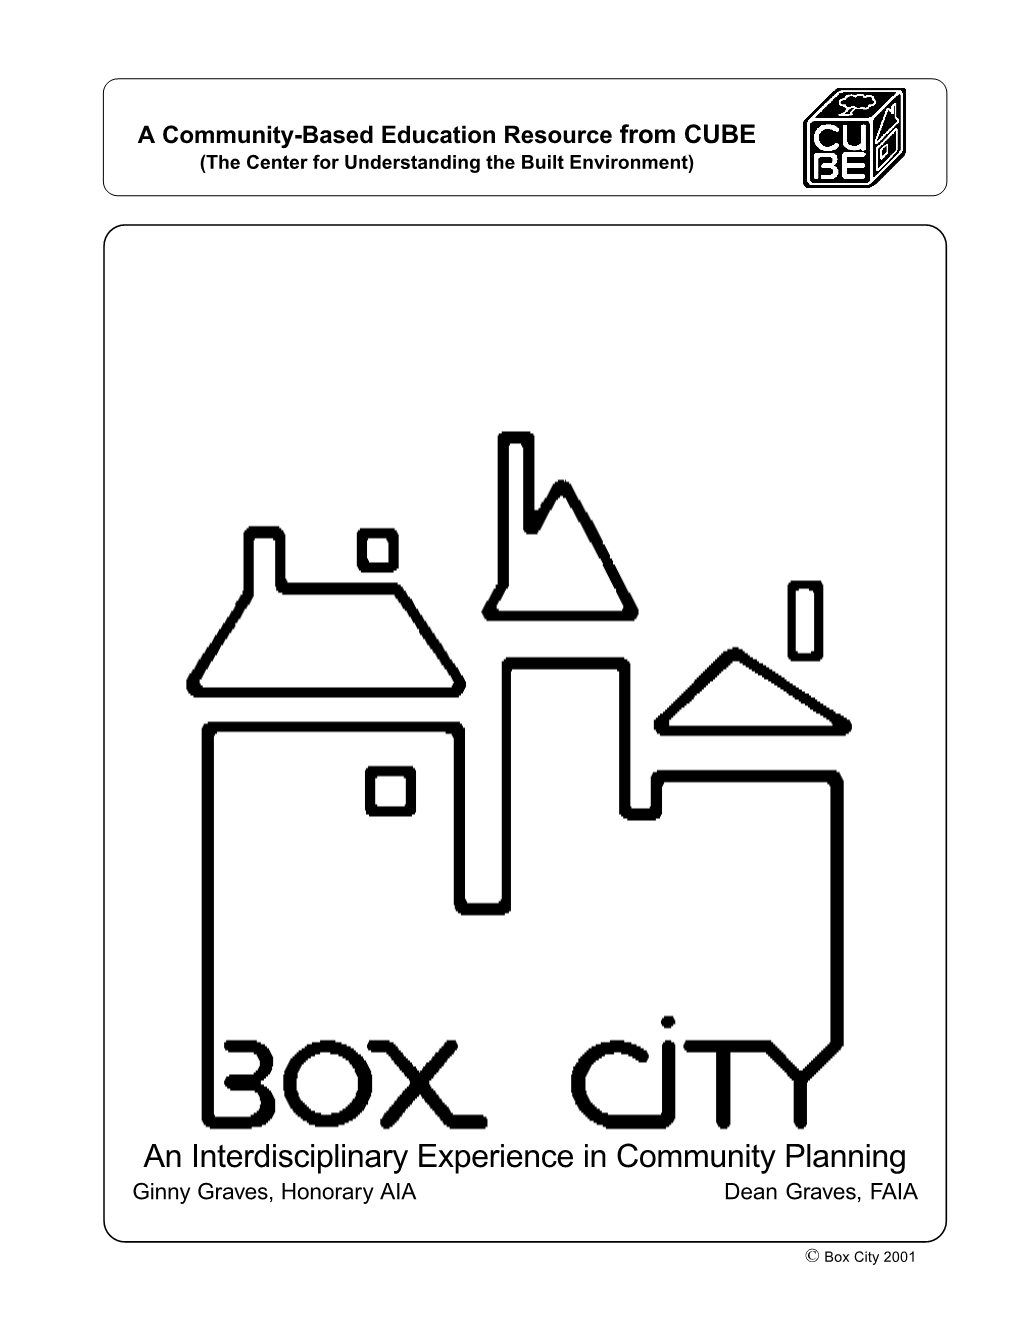 Box City Curriculum Guide Suggests Ways for a Teacher to Work with Students Prior to an Architect Or City Planner’S Visit